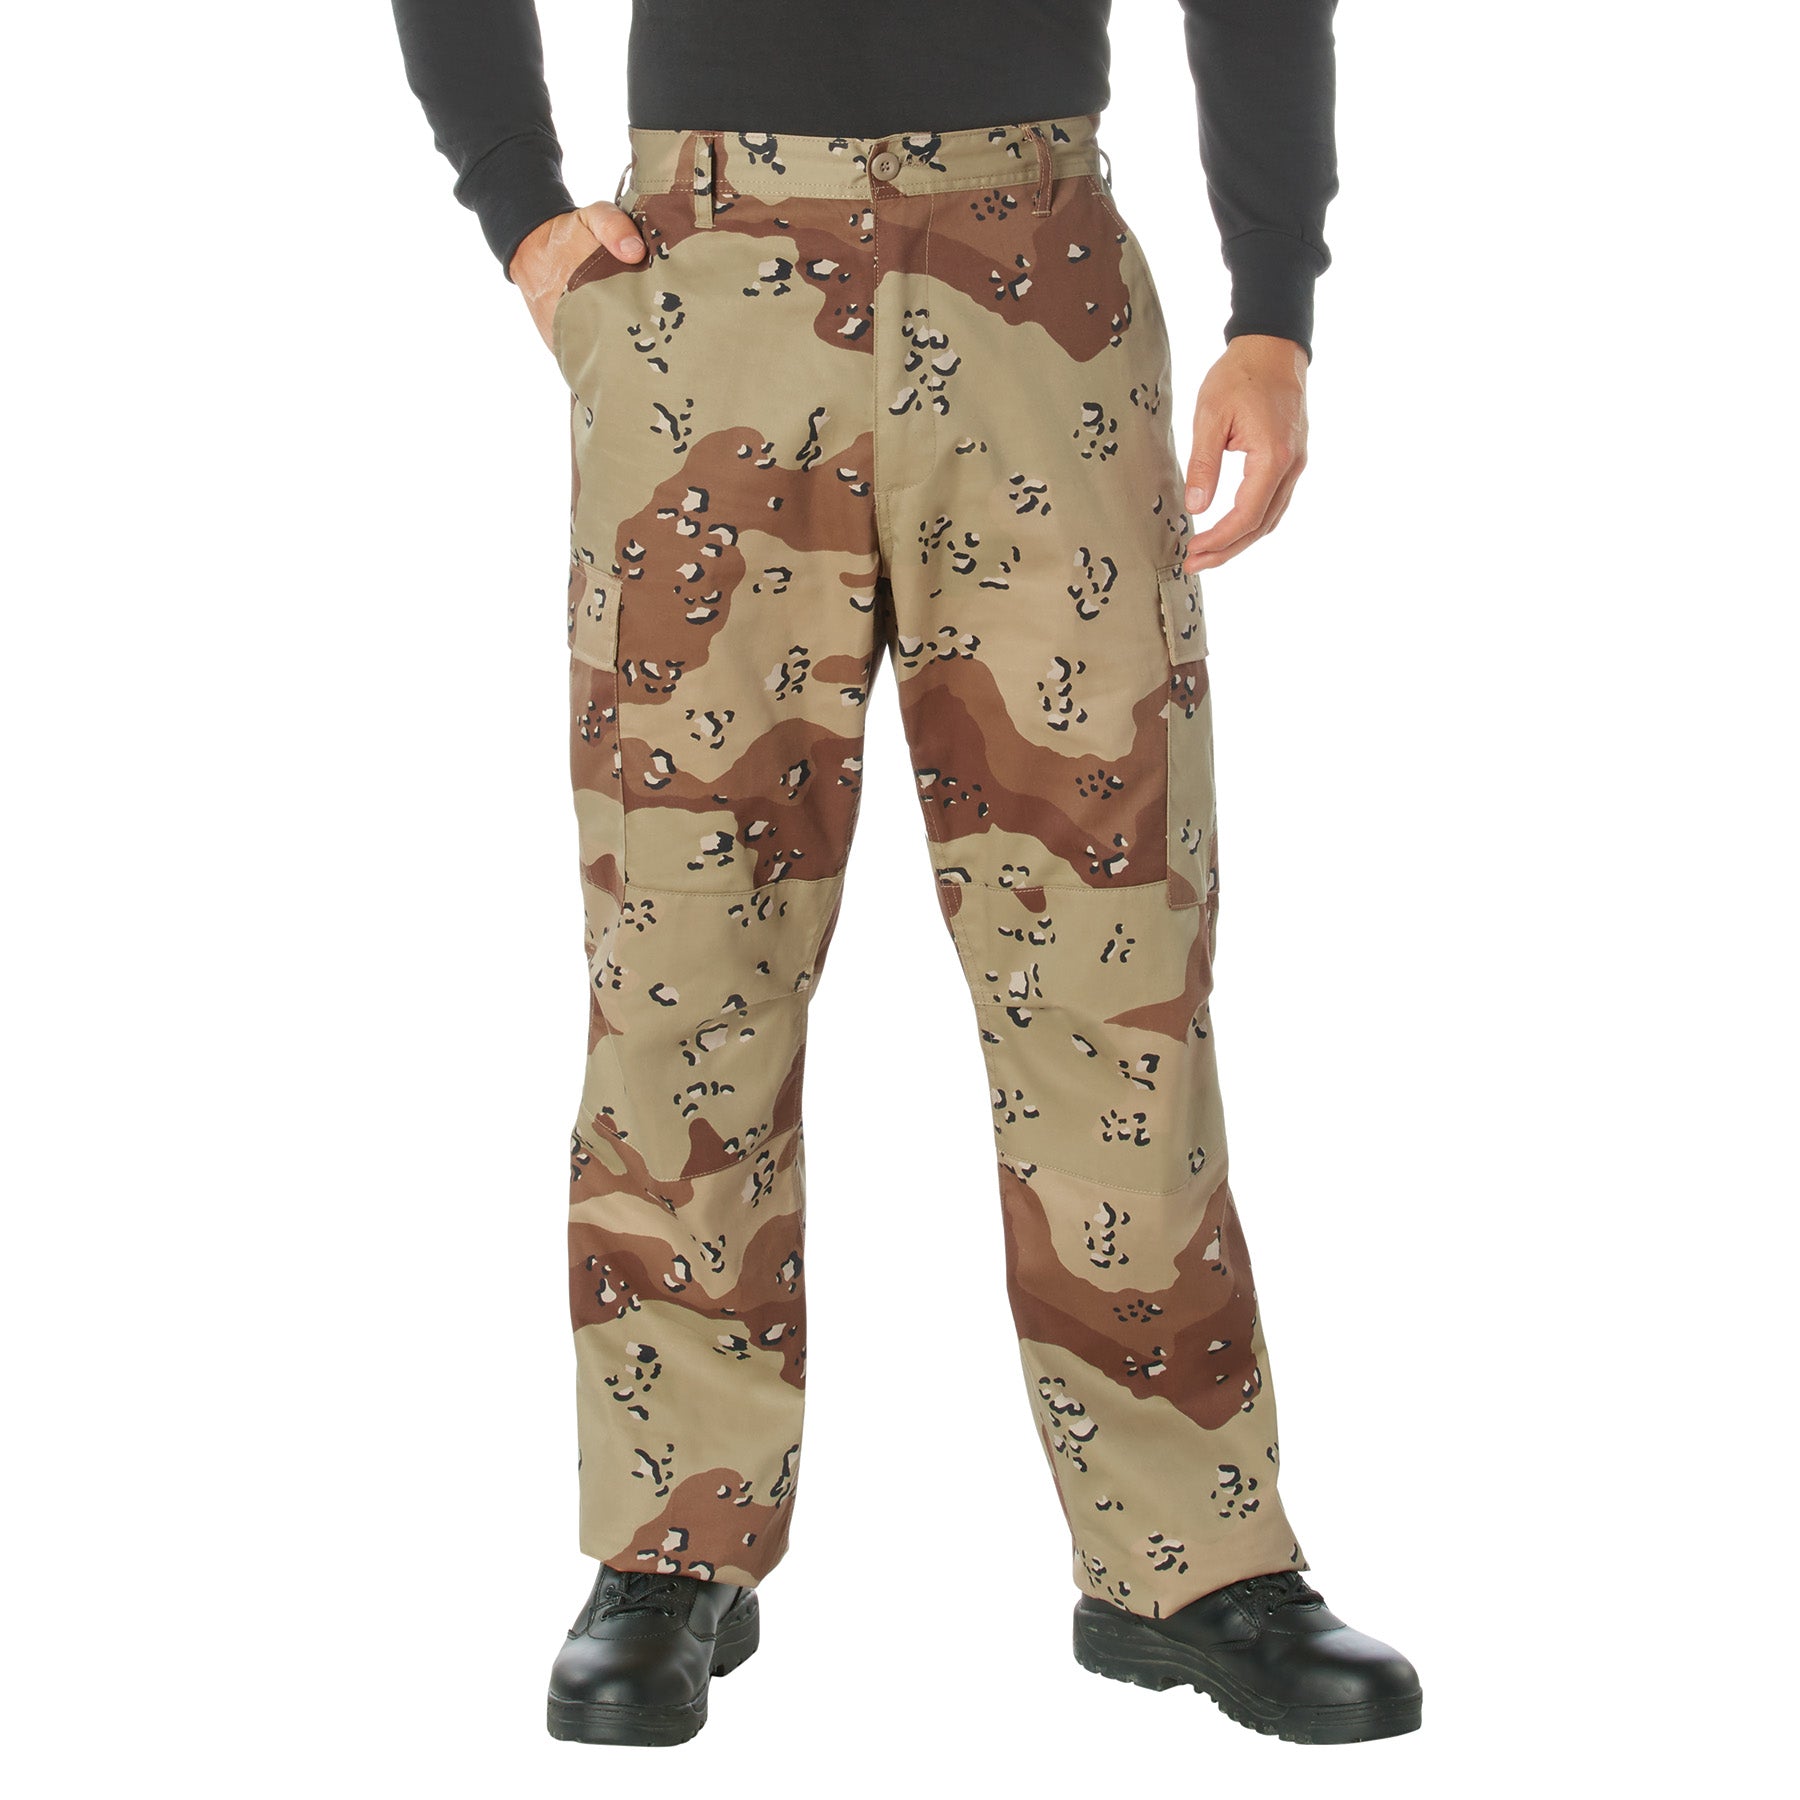 DANISH MILITARY CAMOUFLAGE BDU PANTS MILITARY CARGO 6 POCKET FATIGUE  TROUSERS | eBay